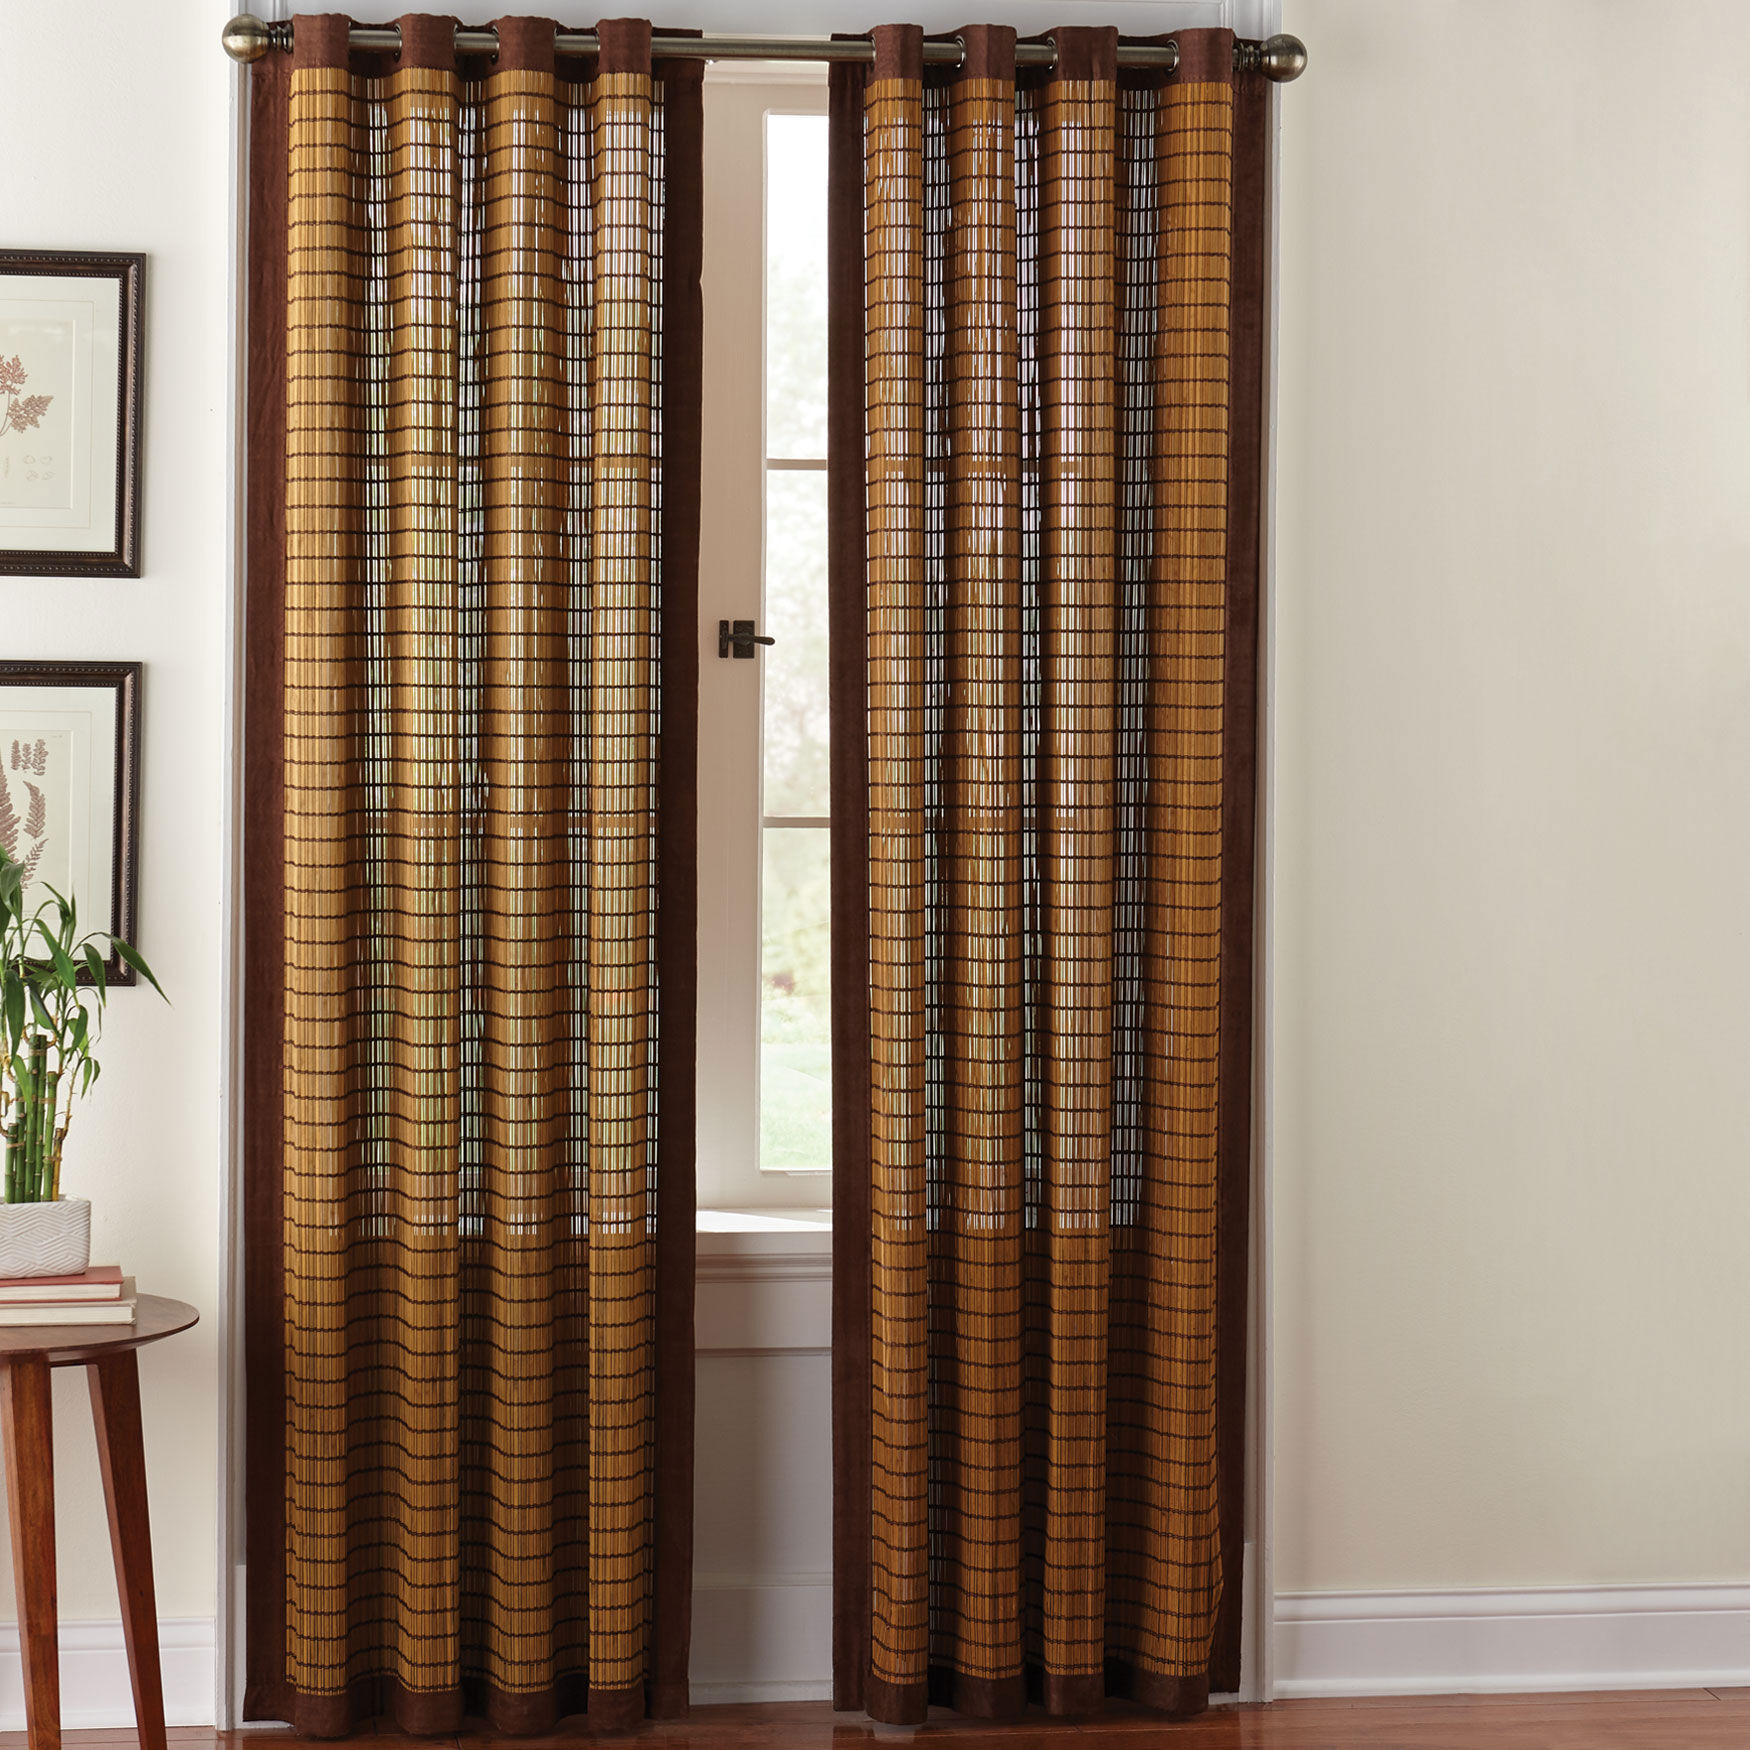 Naples Bamboo Grommet Panels Three Lengths Free Shiping Four Color Choices 